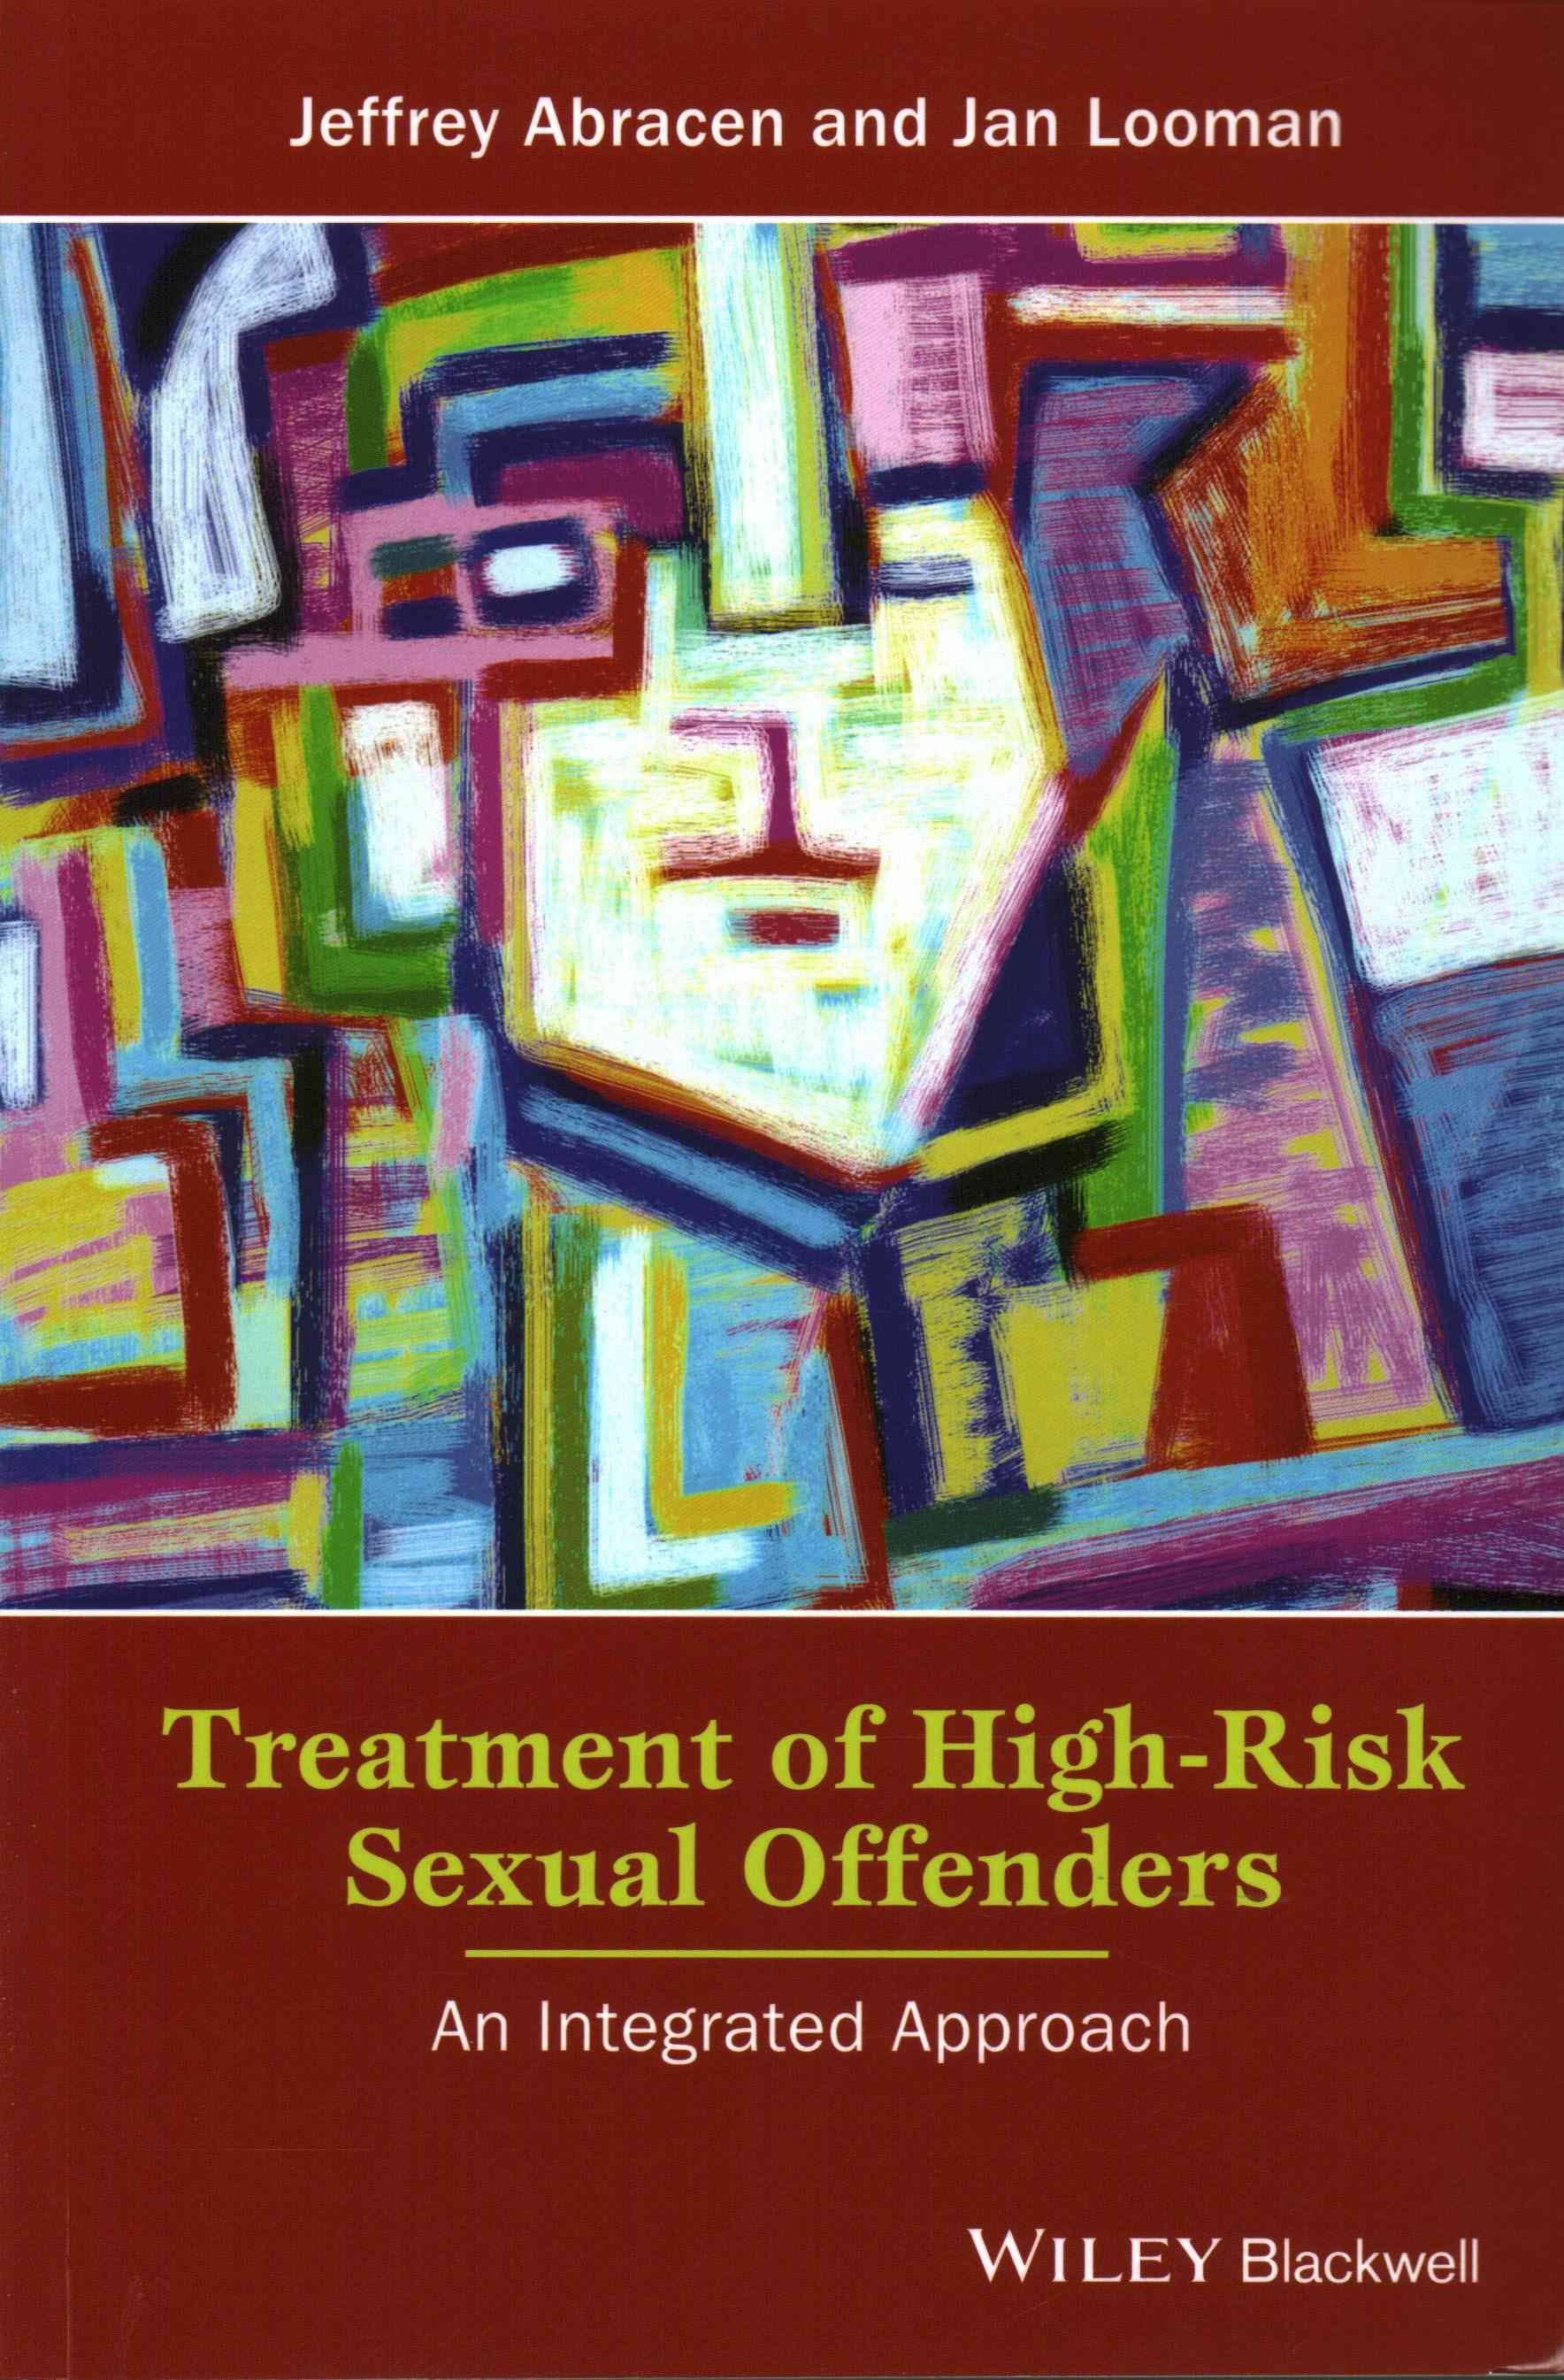 Treatment of High-Risk Sexual Offenders - An Integrated Approach